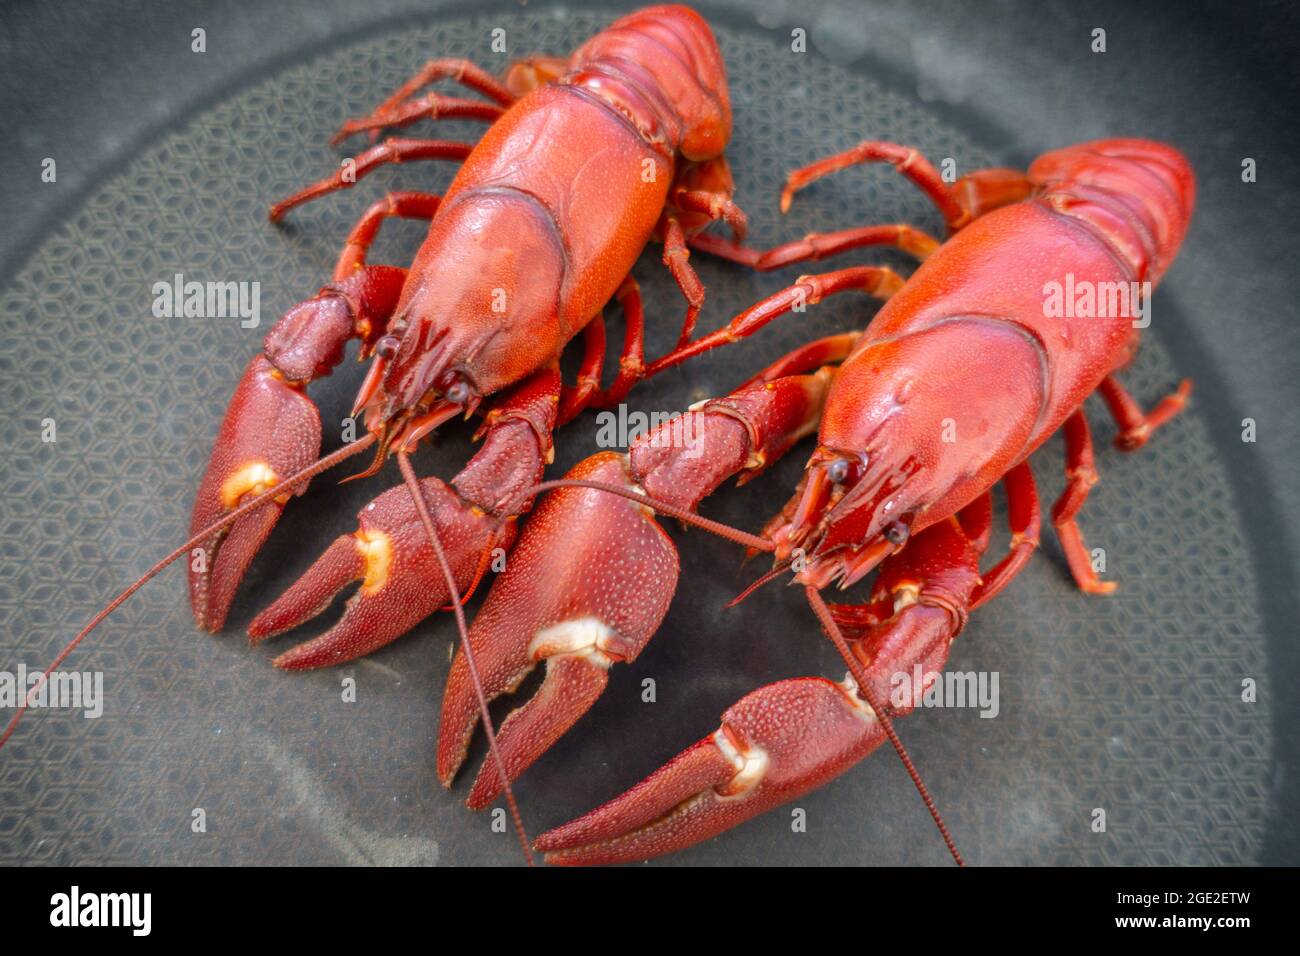 American Signal crayfish, Pacifastacus leniusculus, an Invasive Species caught in an English river, in a pan, cooked. Stock Photo